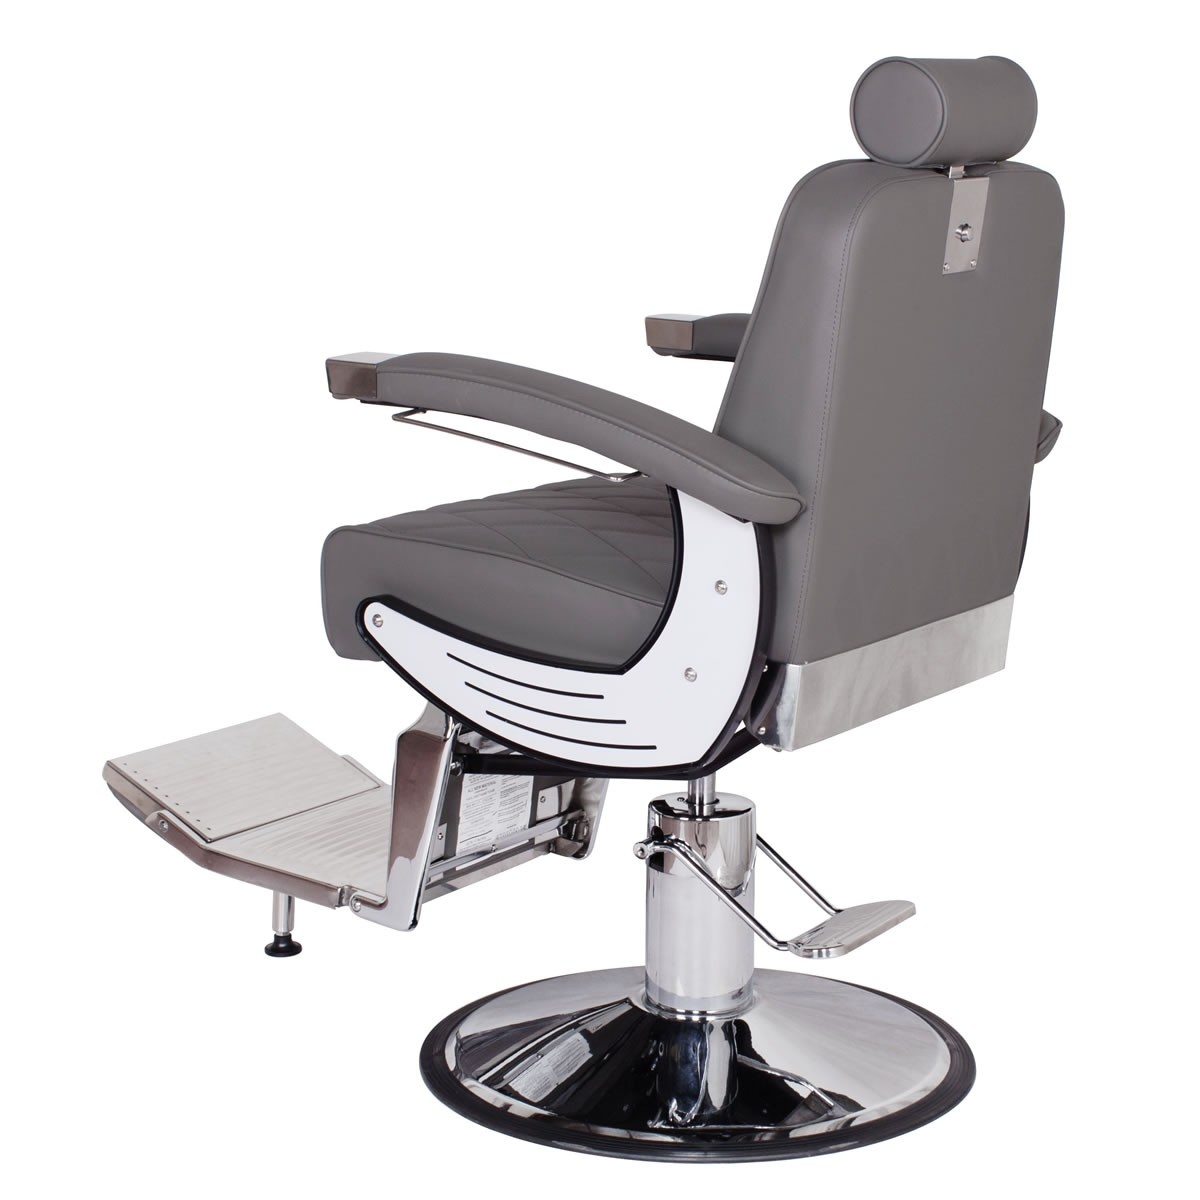 Baron Barber Chair In Grey Grey Barber Shop Chairs Barber Furniture Barber Equipment